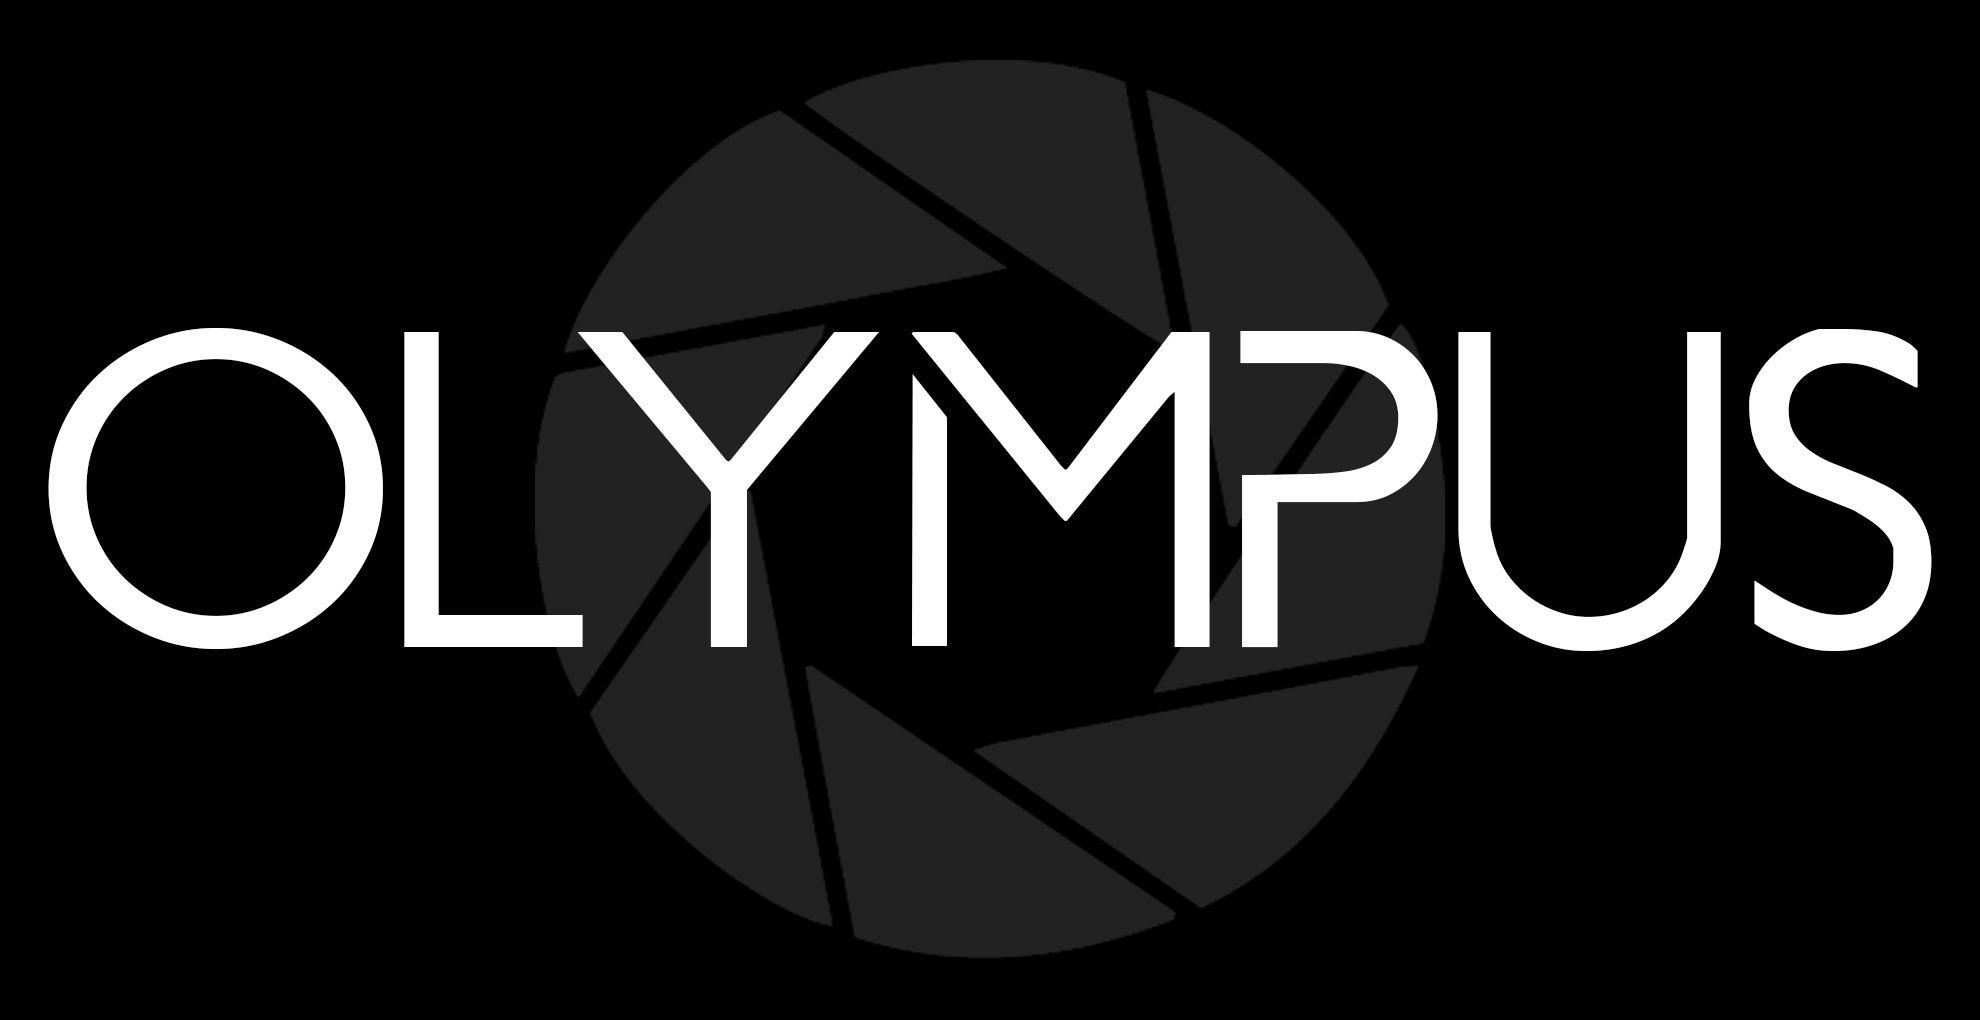 Olympus Logo - Olympus Rebrand - The Creative Works of Eric Jussaume